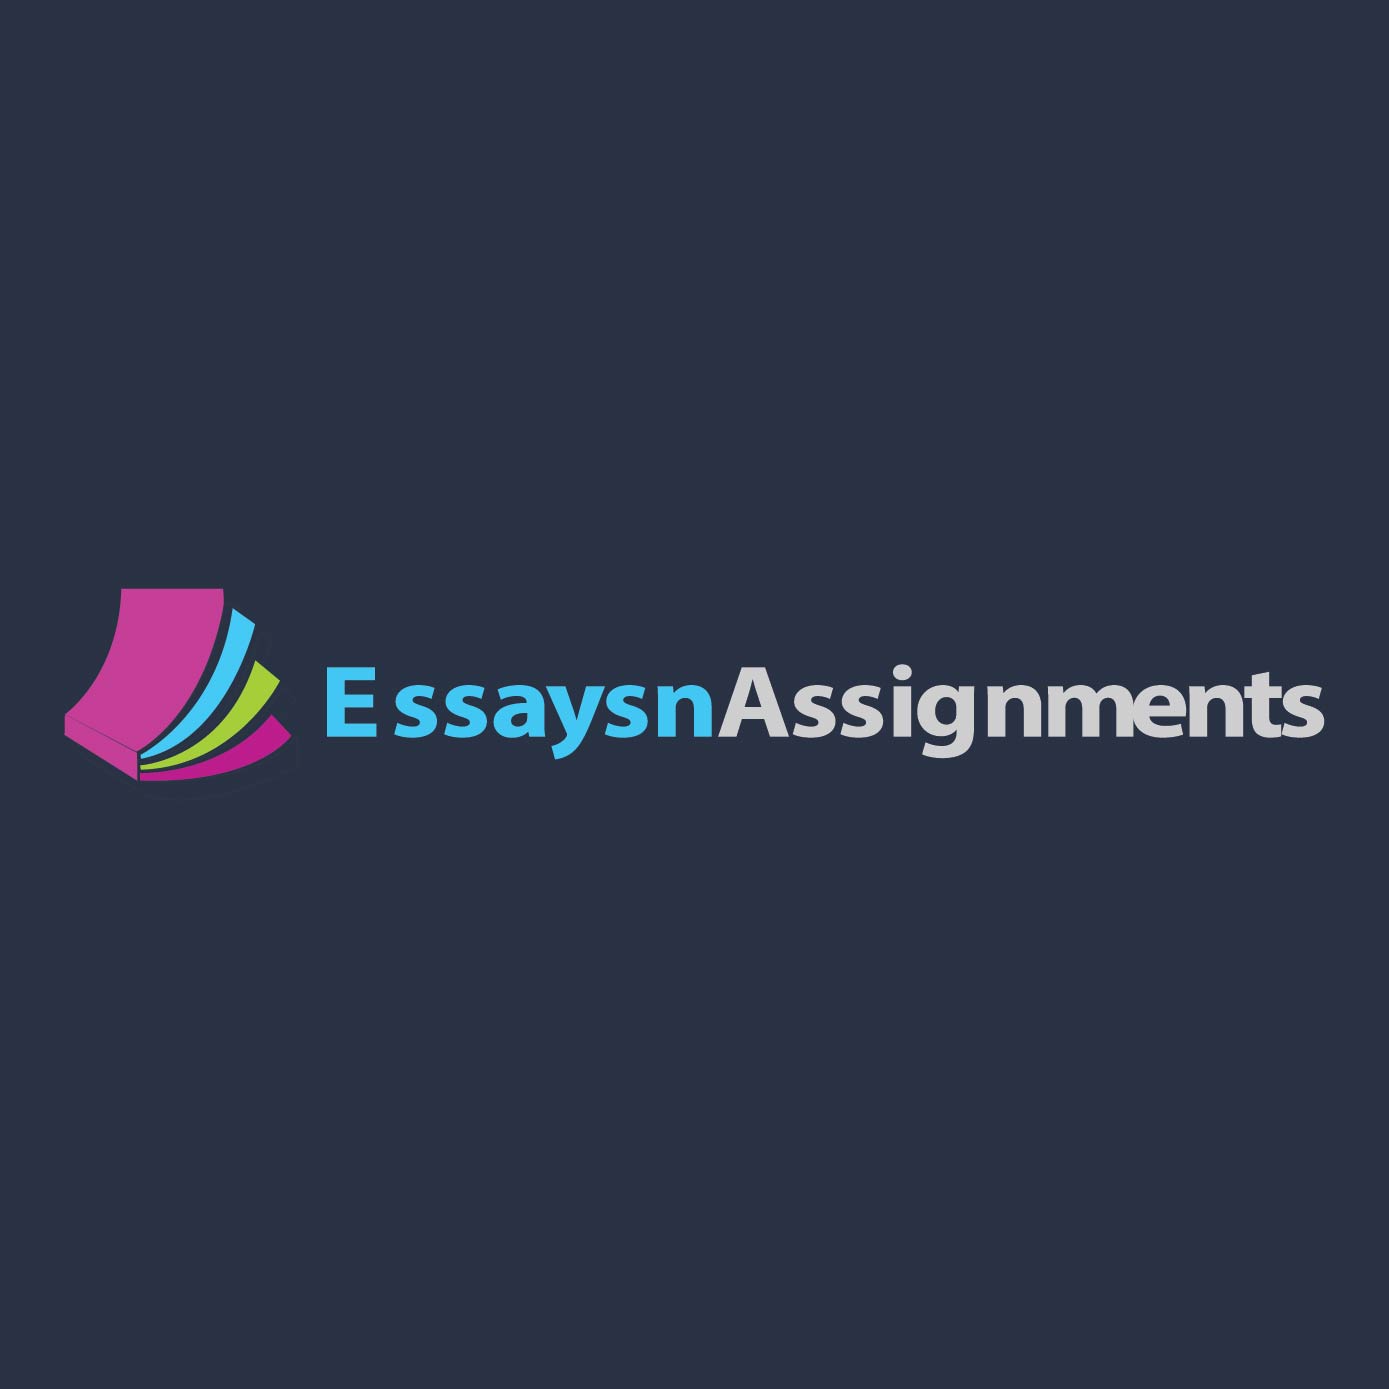 dissertation writing services uk | educational services in kington